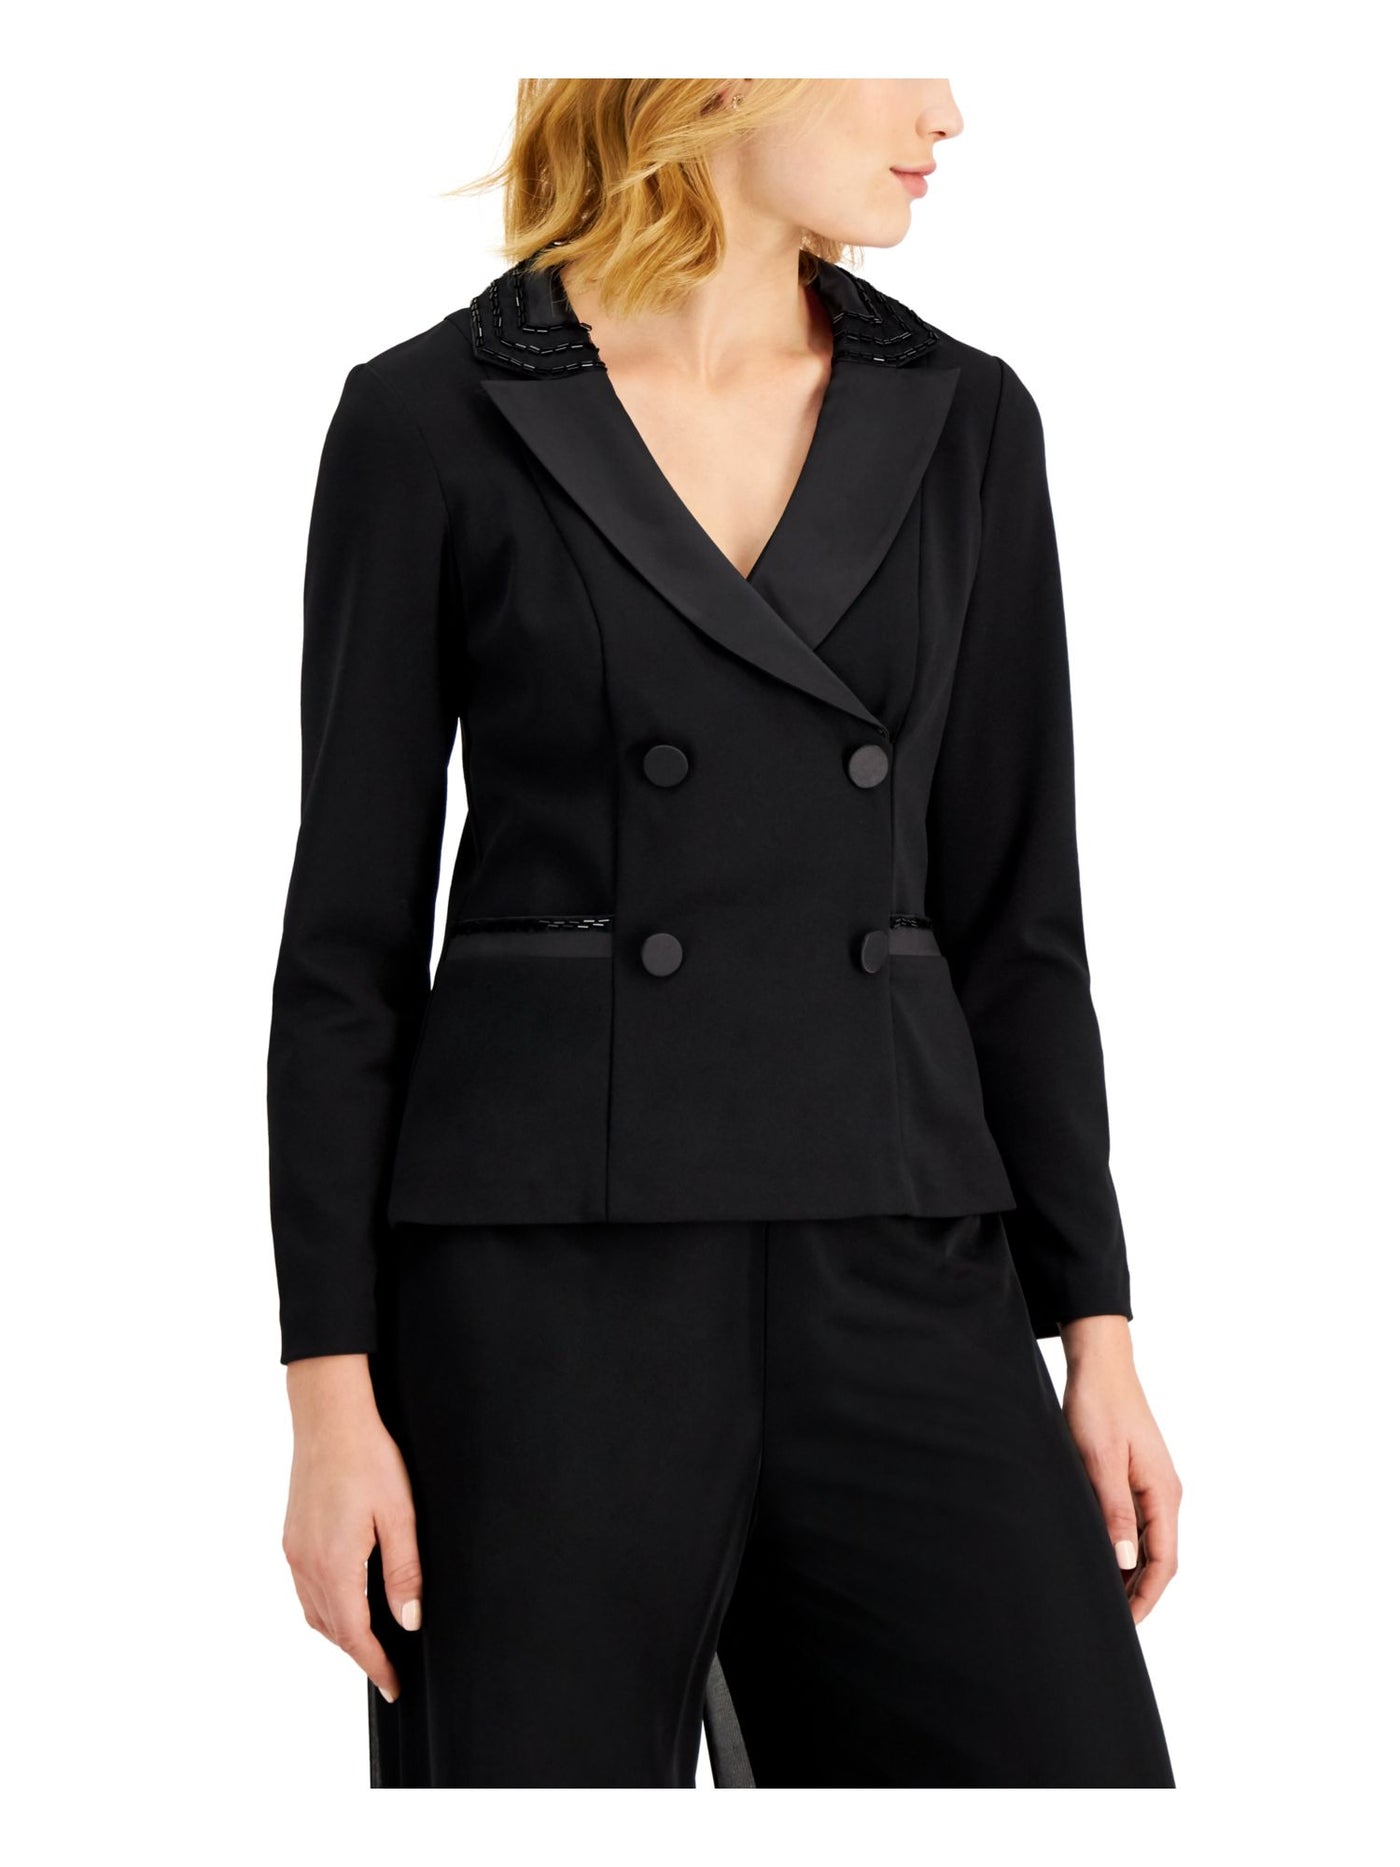 ADRIANNA PAPELL Womens Black Beaded Lined Double Breasted Tuxedo Wear To Work Jacket 2